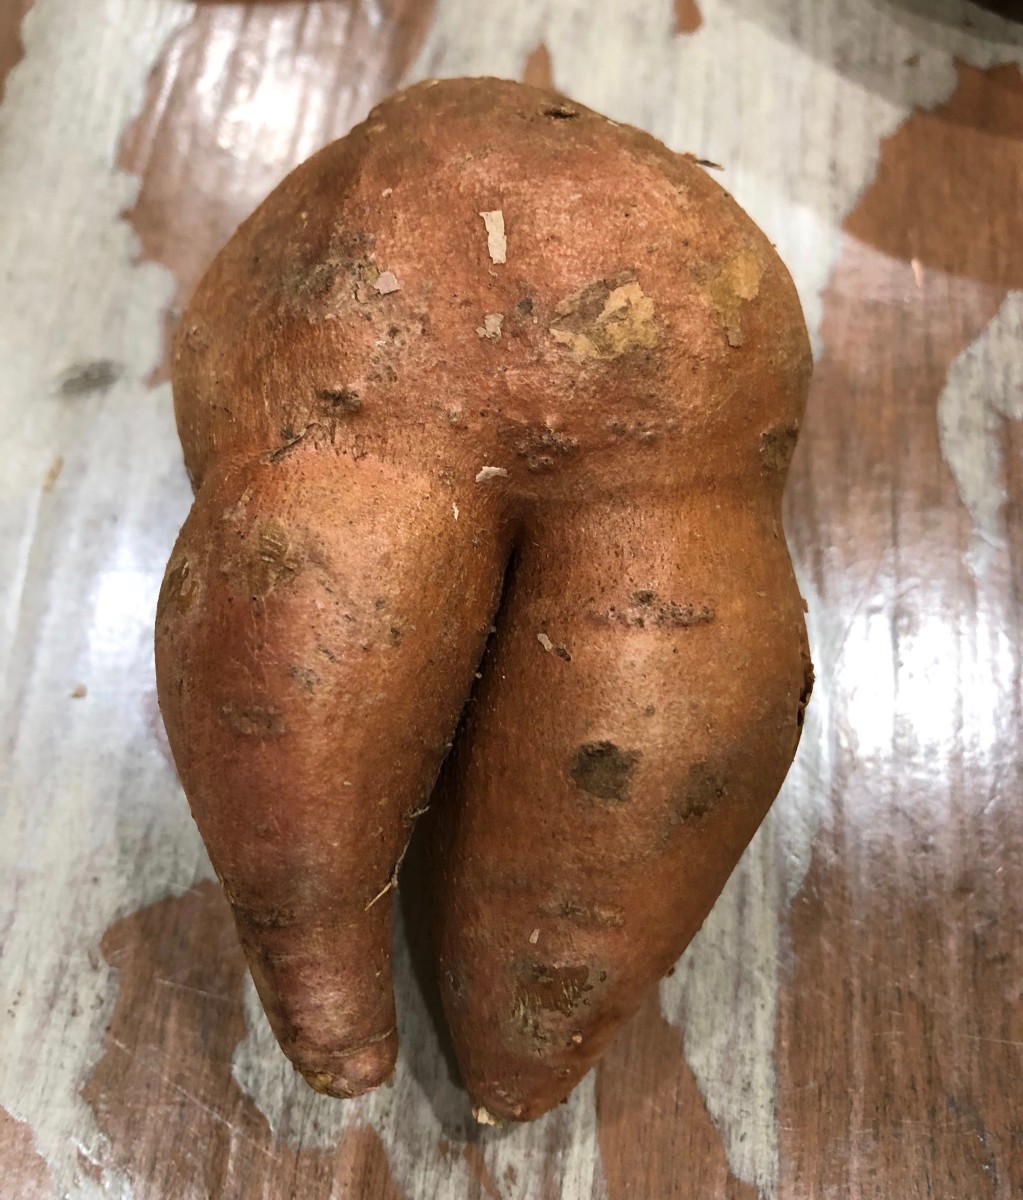 I grew sweet potatoes during the summer of 2020. When we harvested them that fall, we found this comical one. It gave us a good laugh.